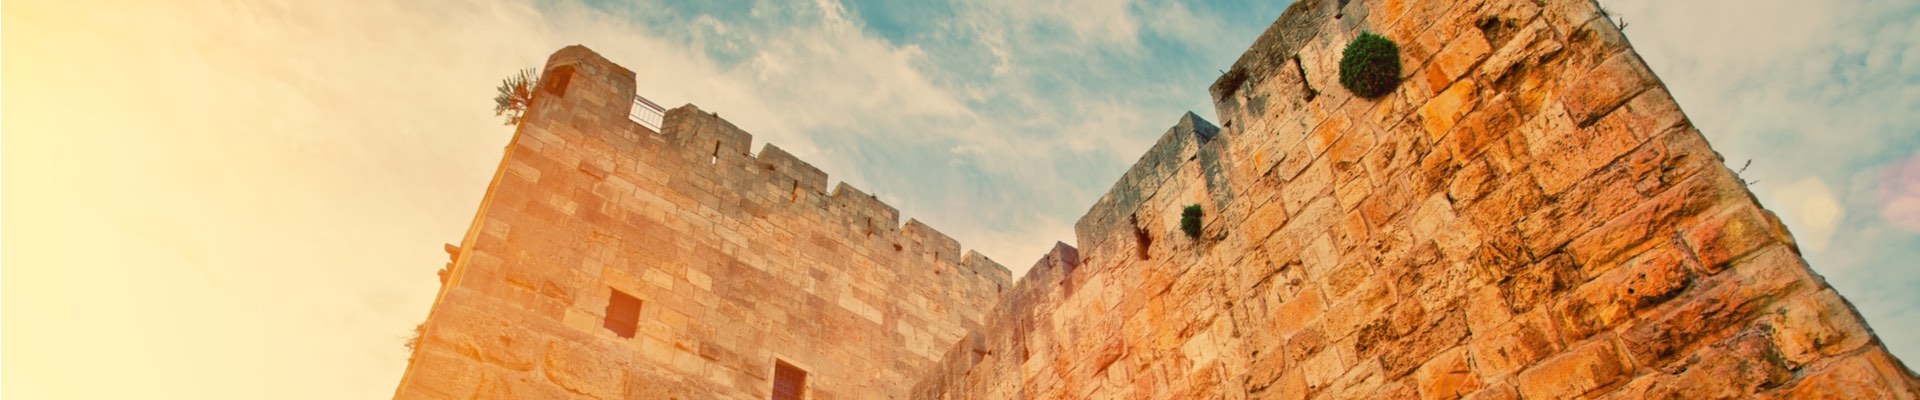 10 Day Jewish and Israel Heritage Family Tour